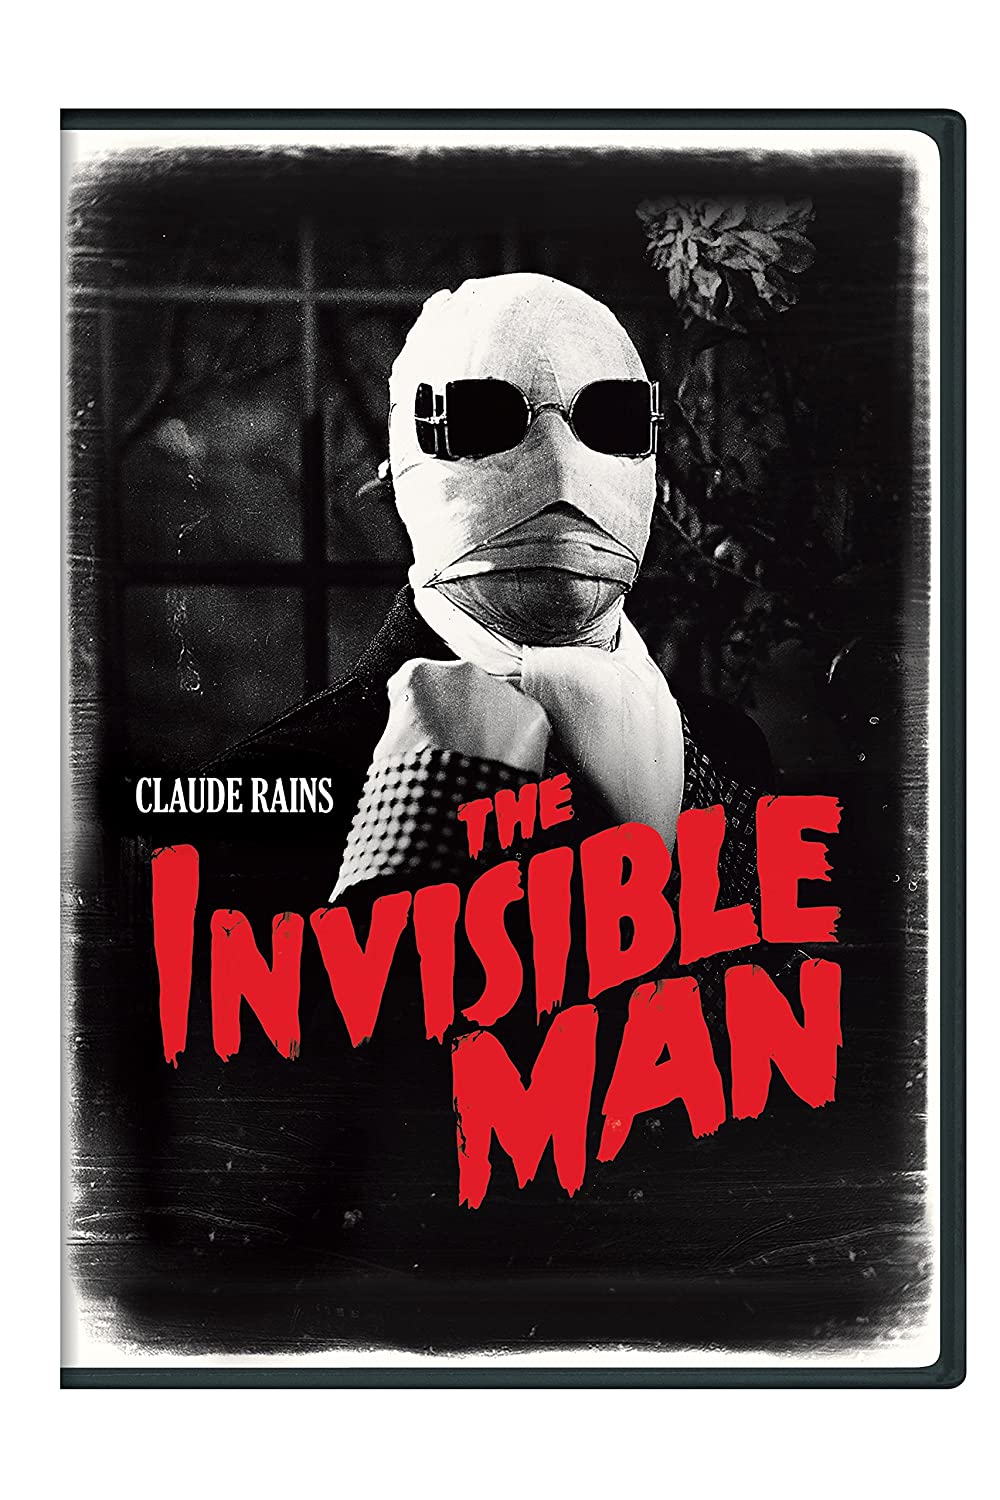 The Invisible Man, starring Claude Rains